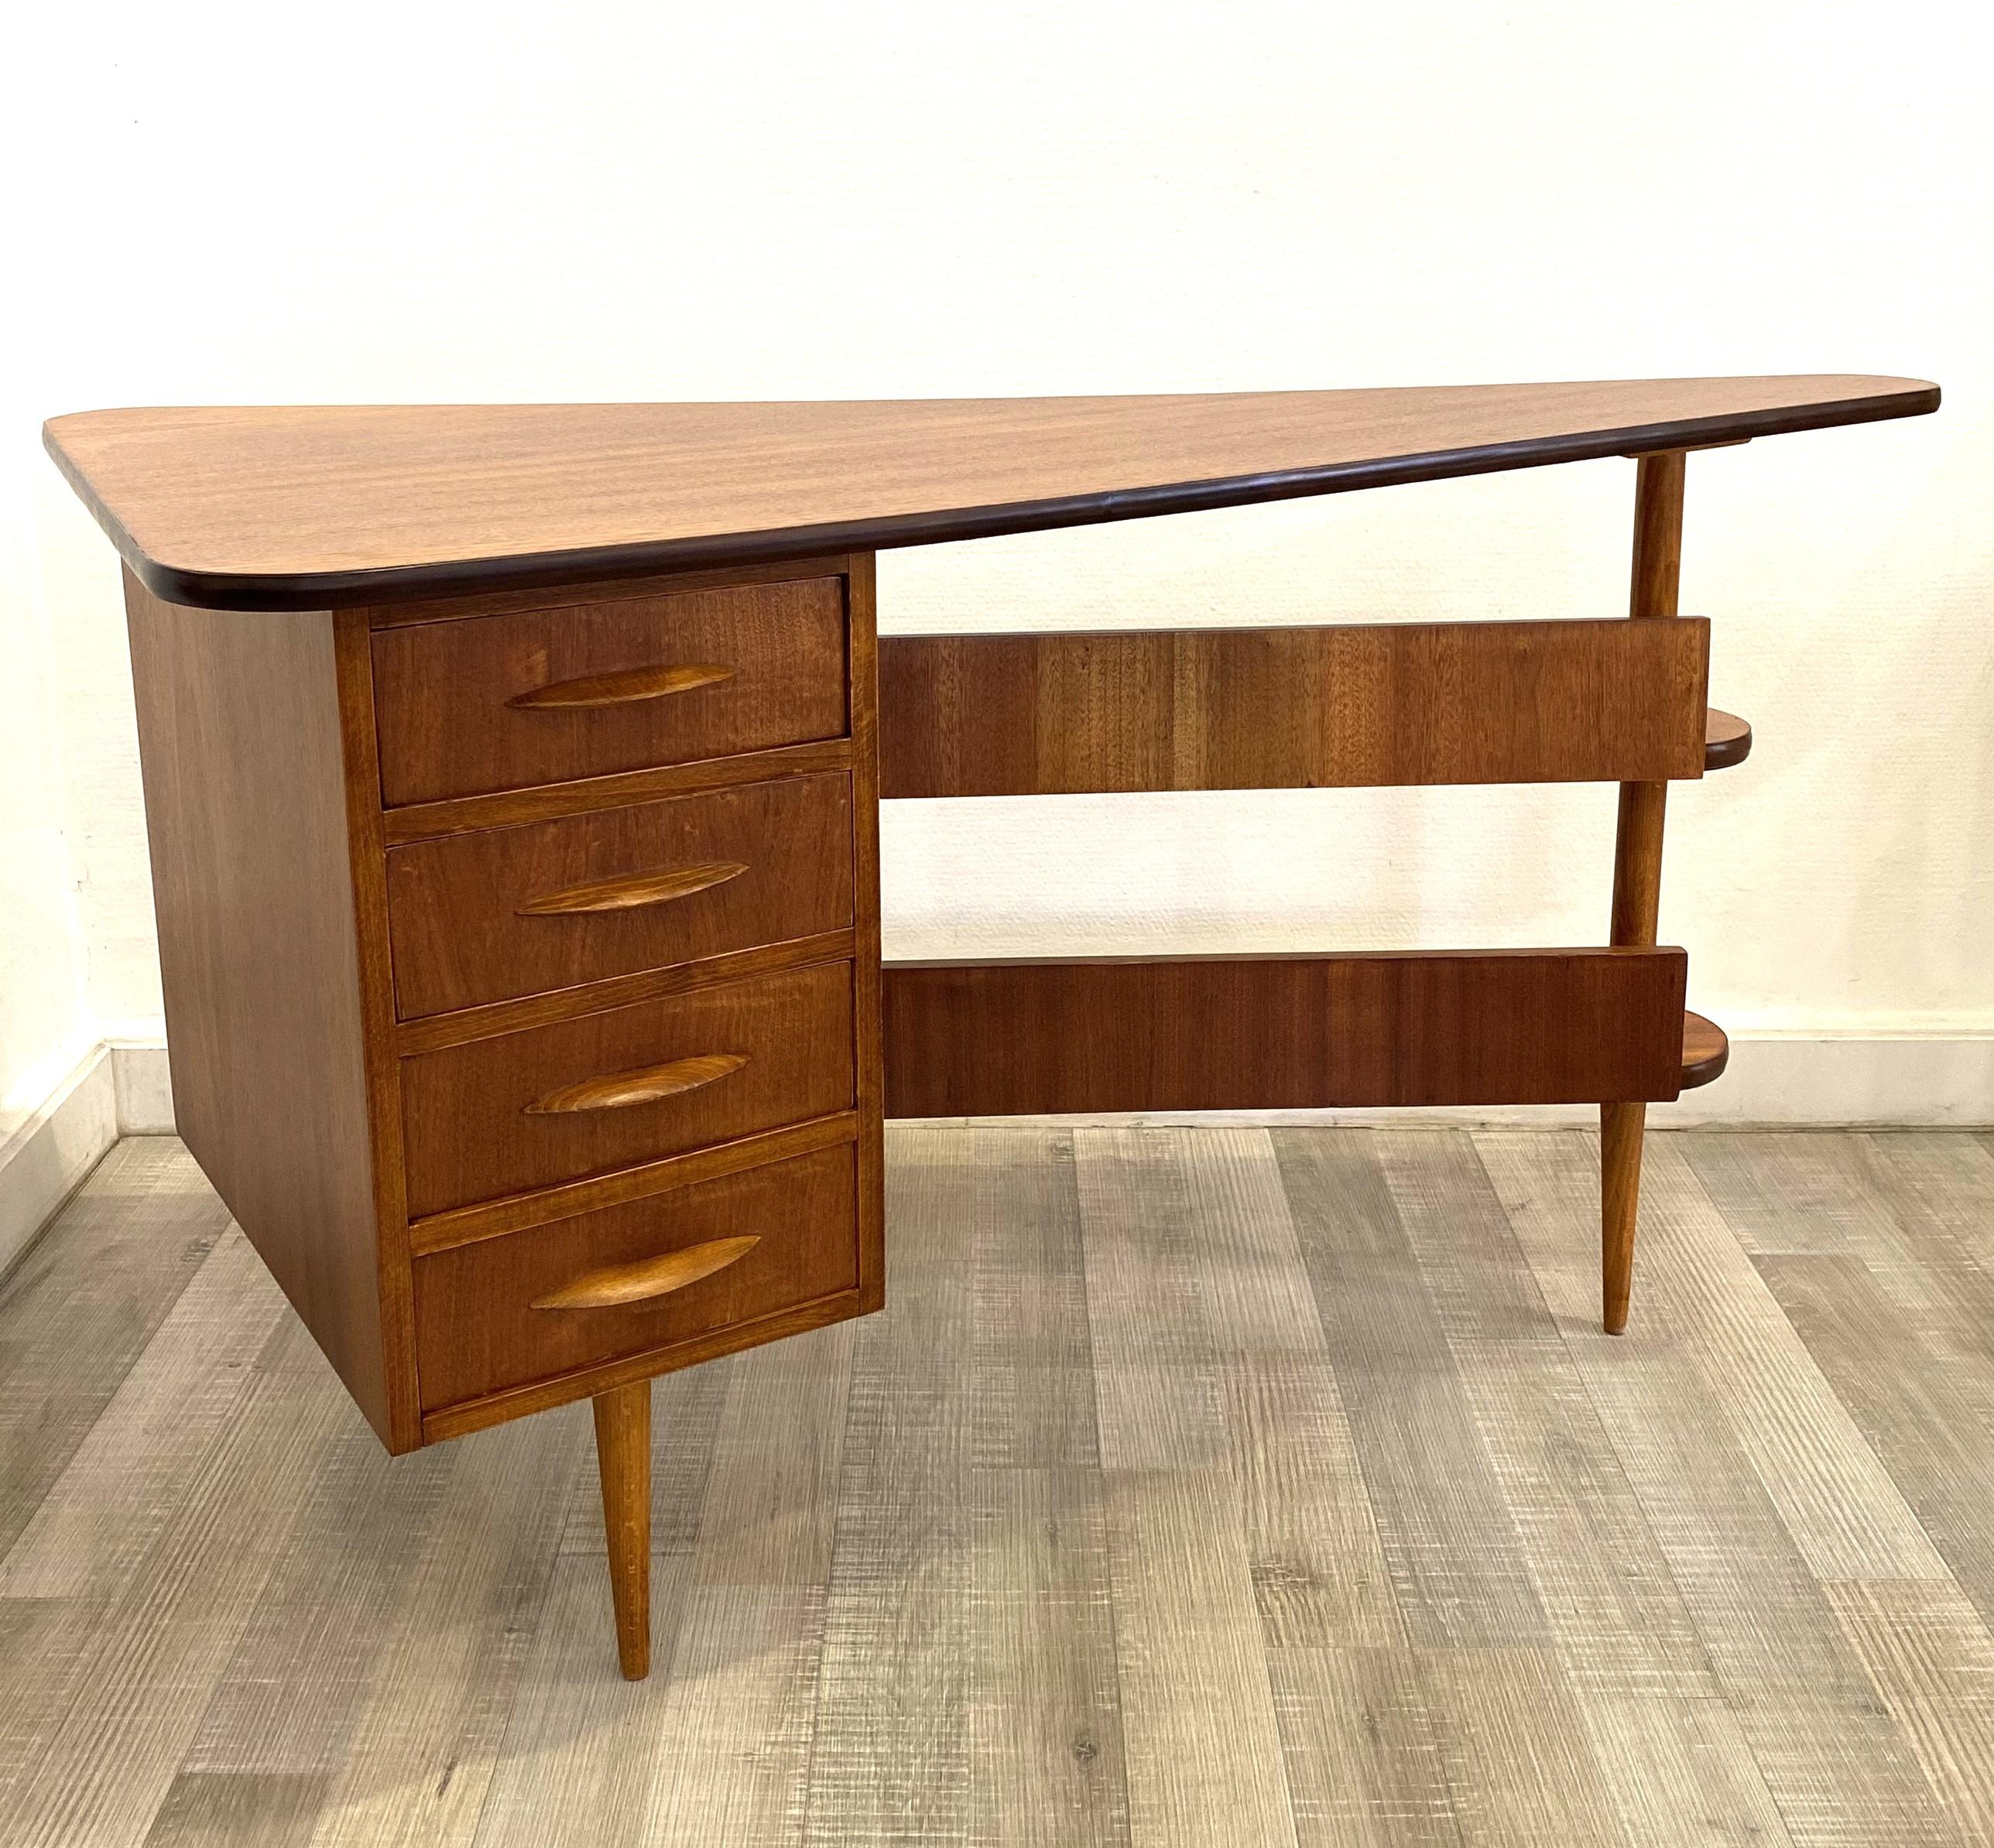 Mid-century triangular desk with drawers in an excellent condition.